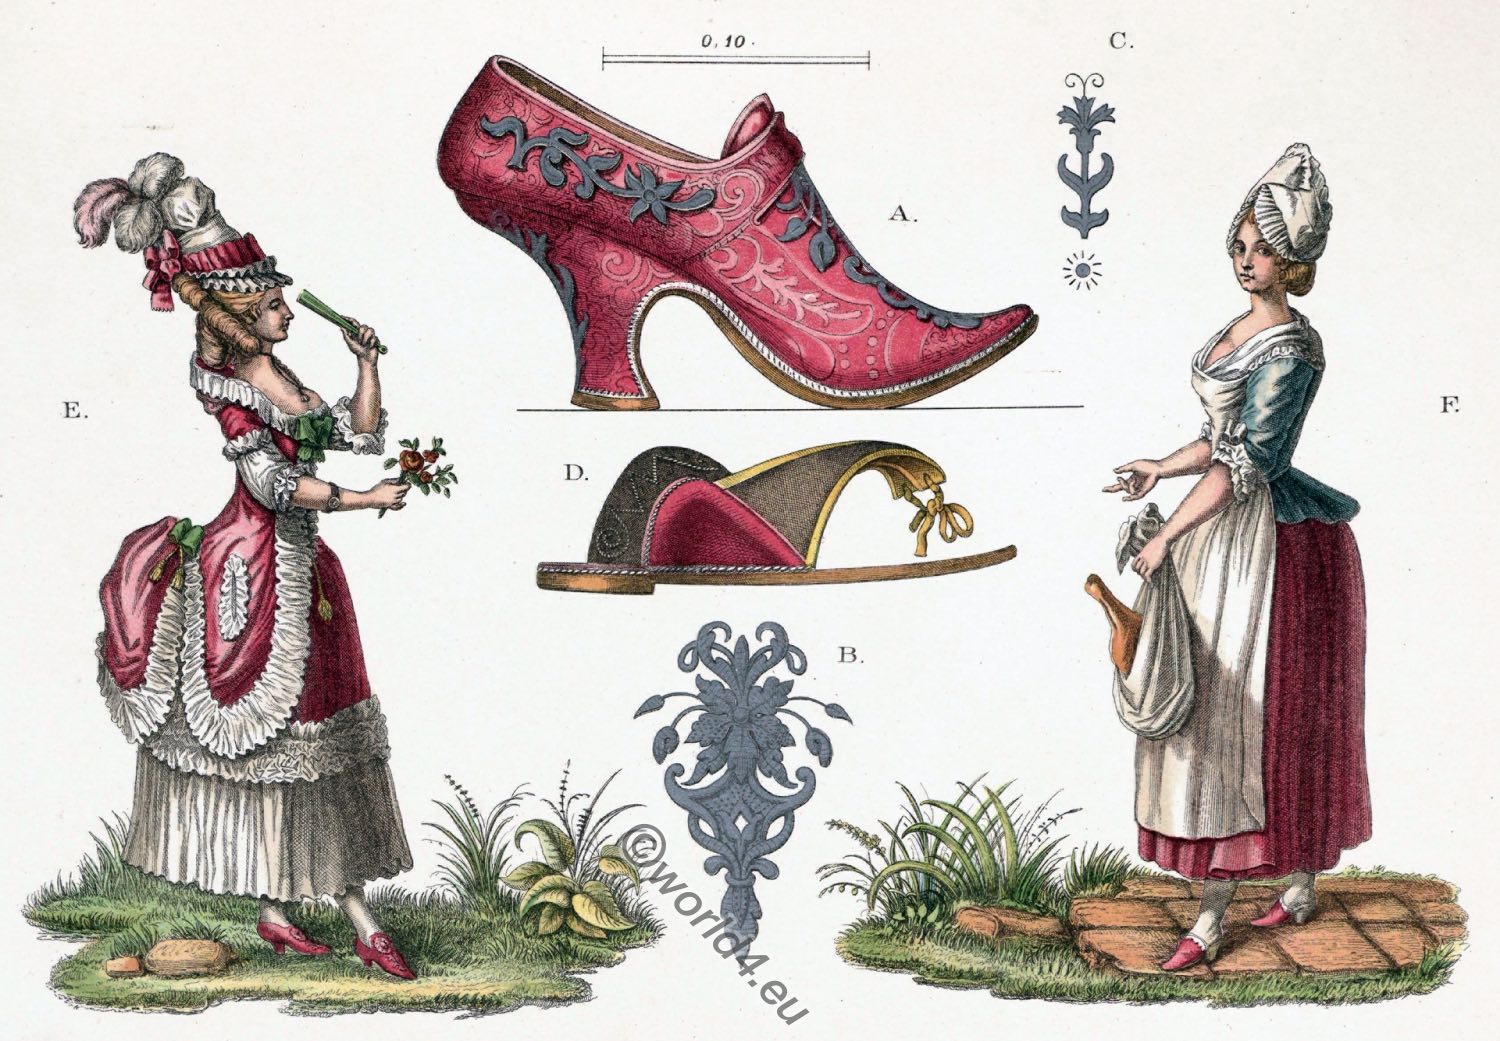 Shoe fashion with high heels and rococo costumes. 18th century.